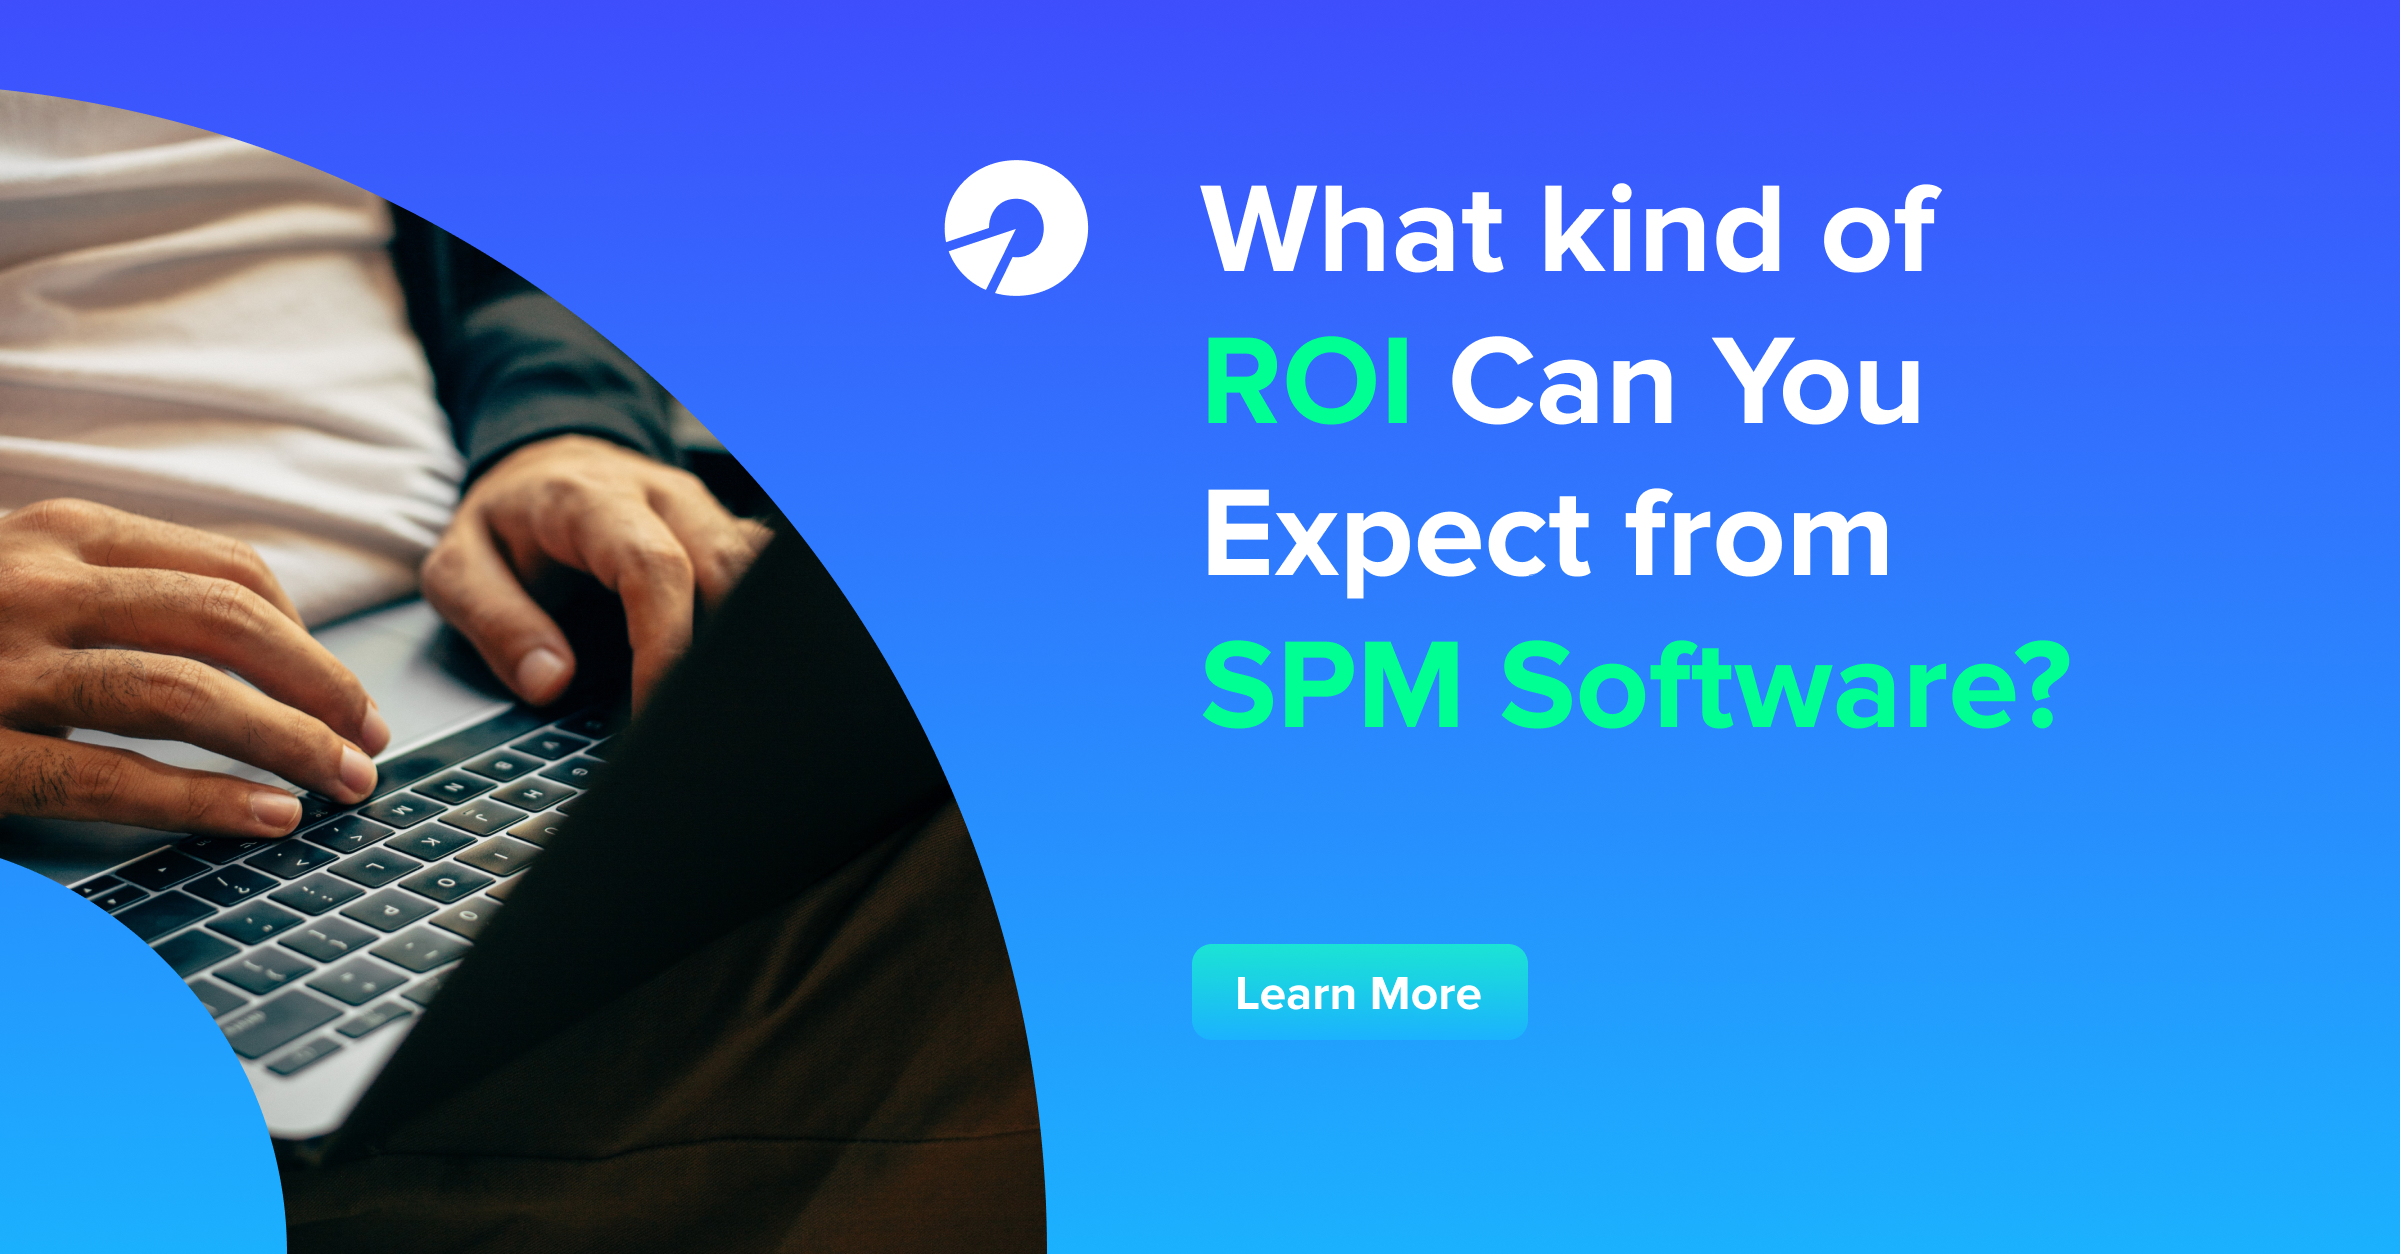 What kind of ROI Can You Expect from SPM?